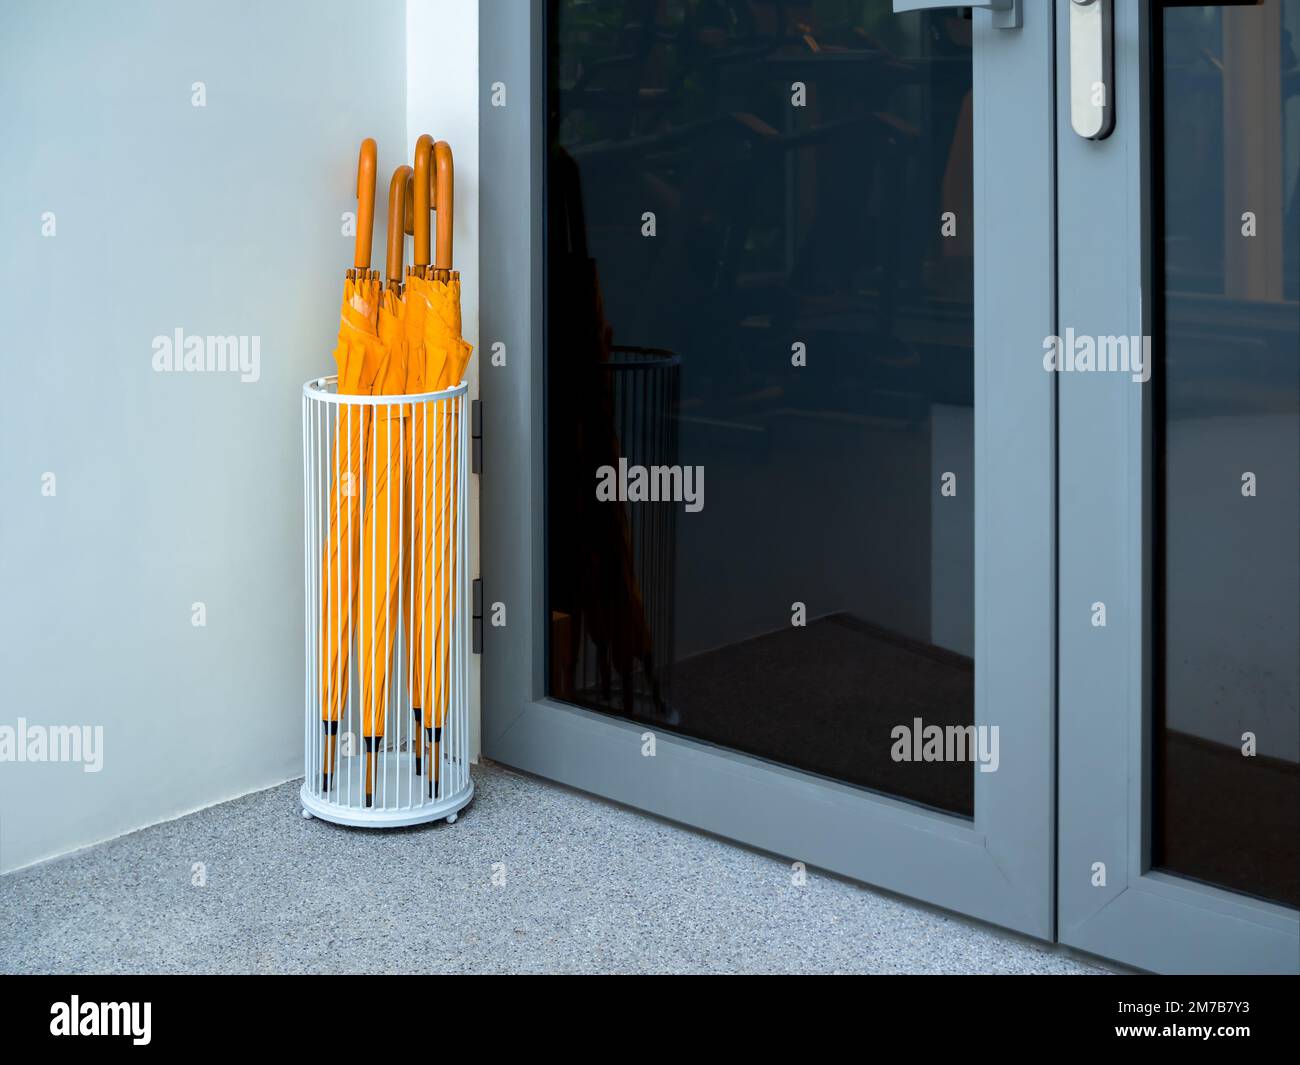 Many yellow umbrellas with wooden handle stored in white vintage steel umbrella storage in front of the glass door of the building. Stock Photo